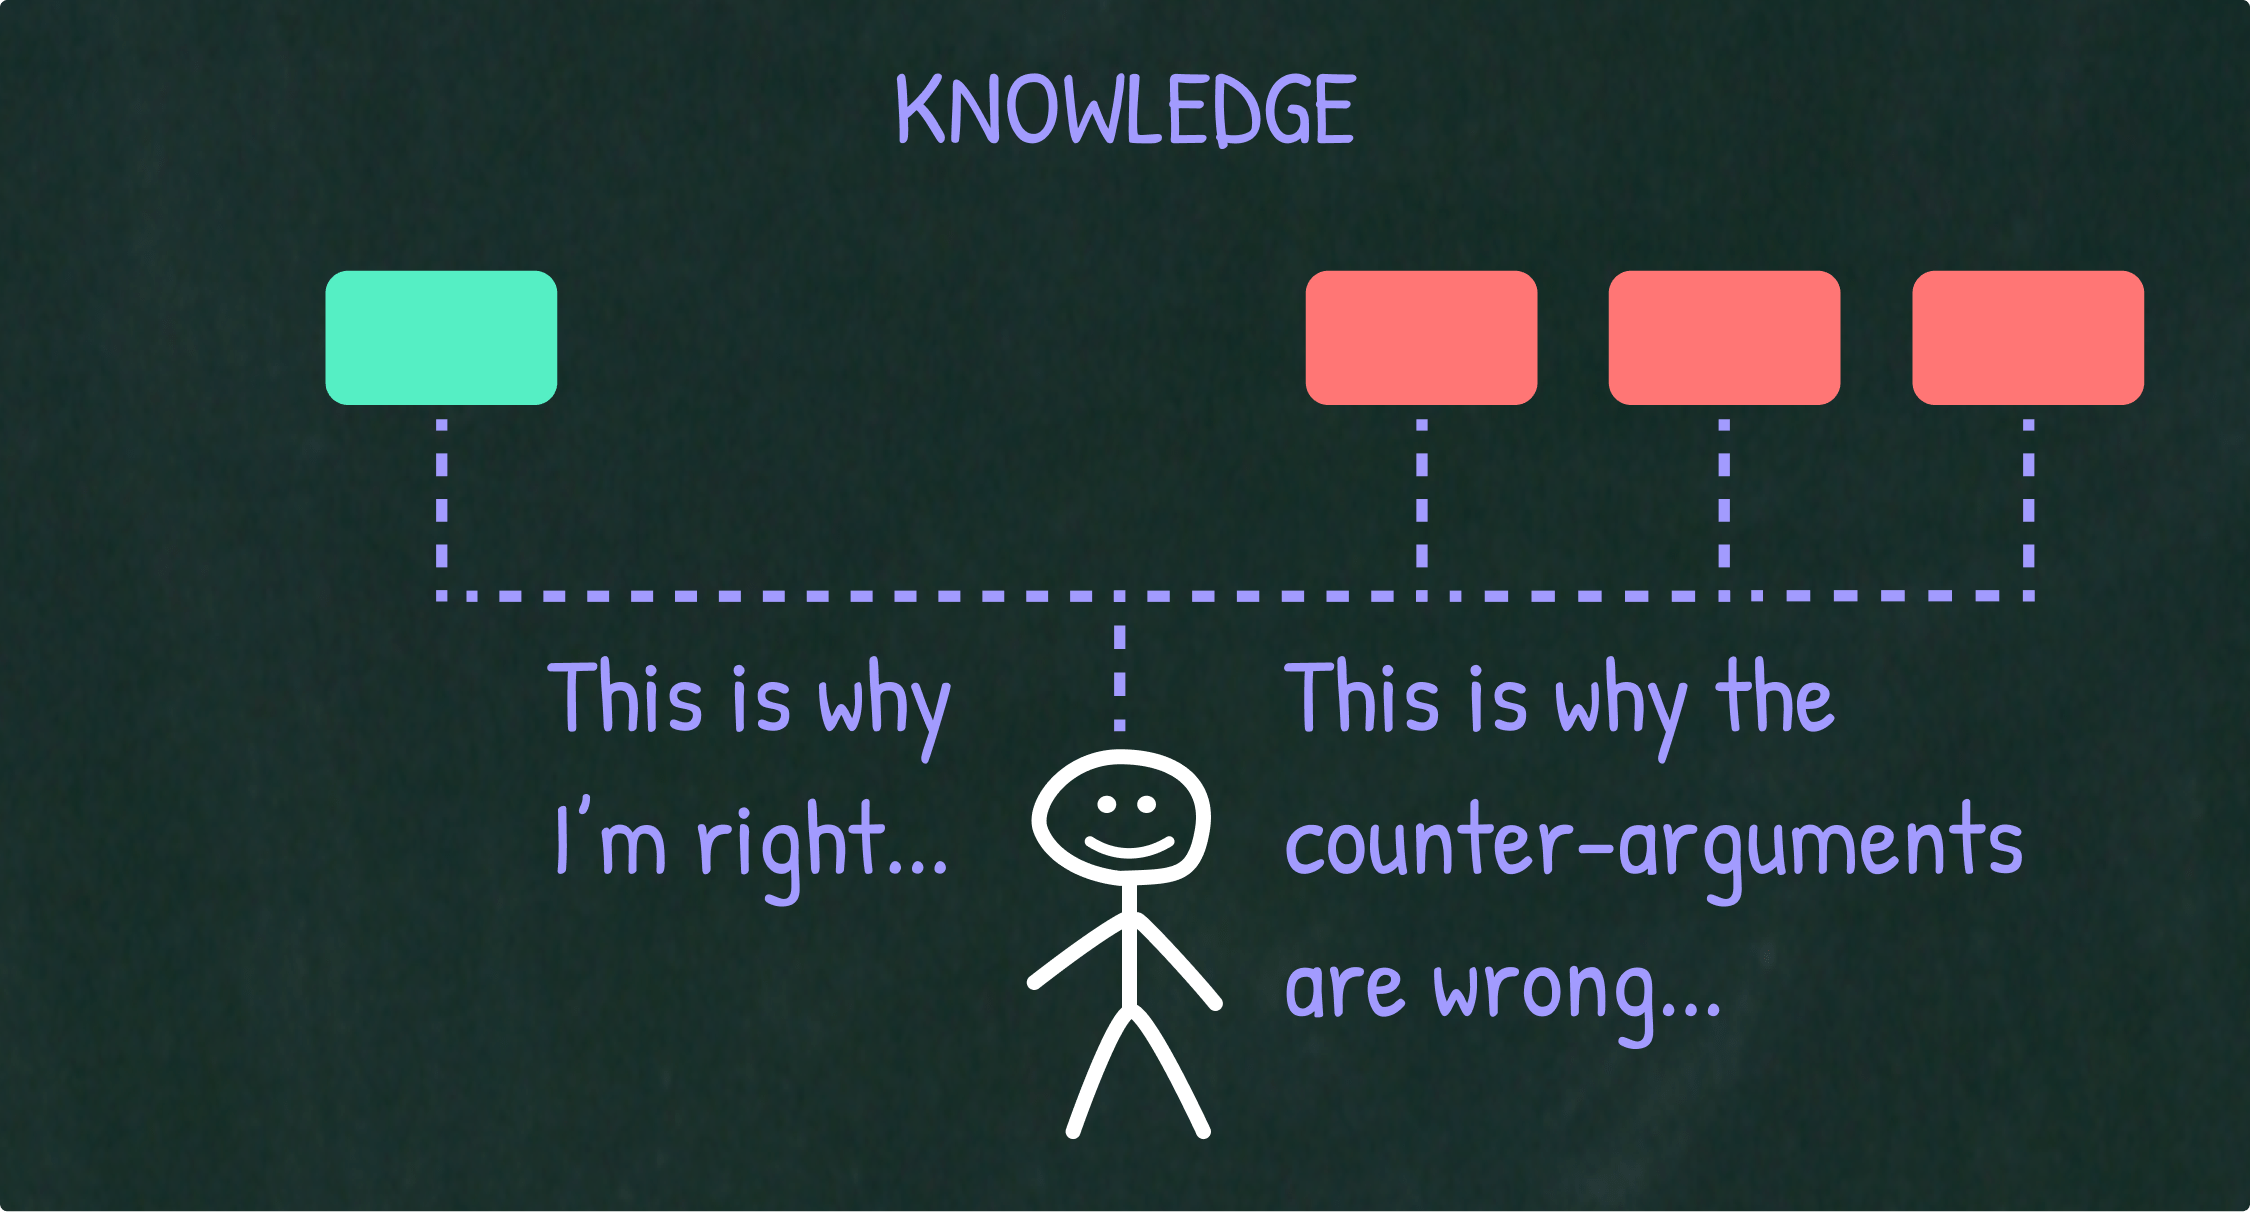 Knowledge is something that you've examined and know is right.